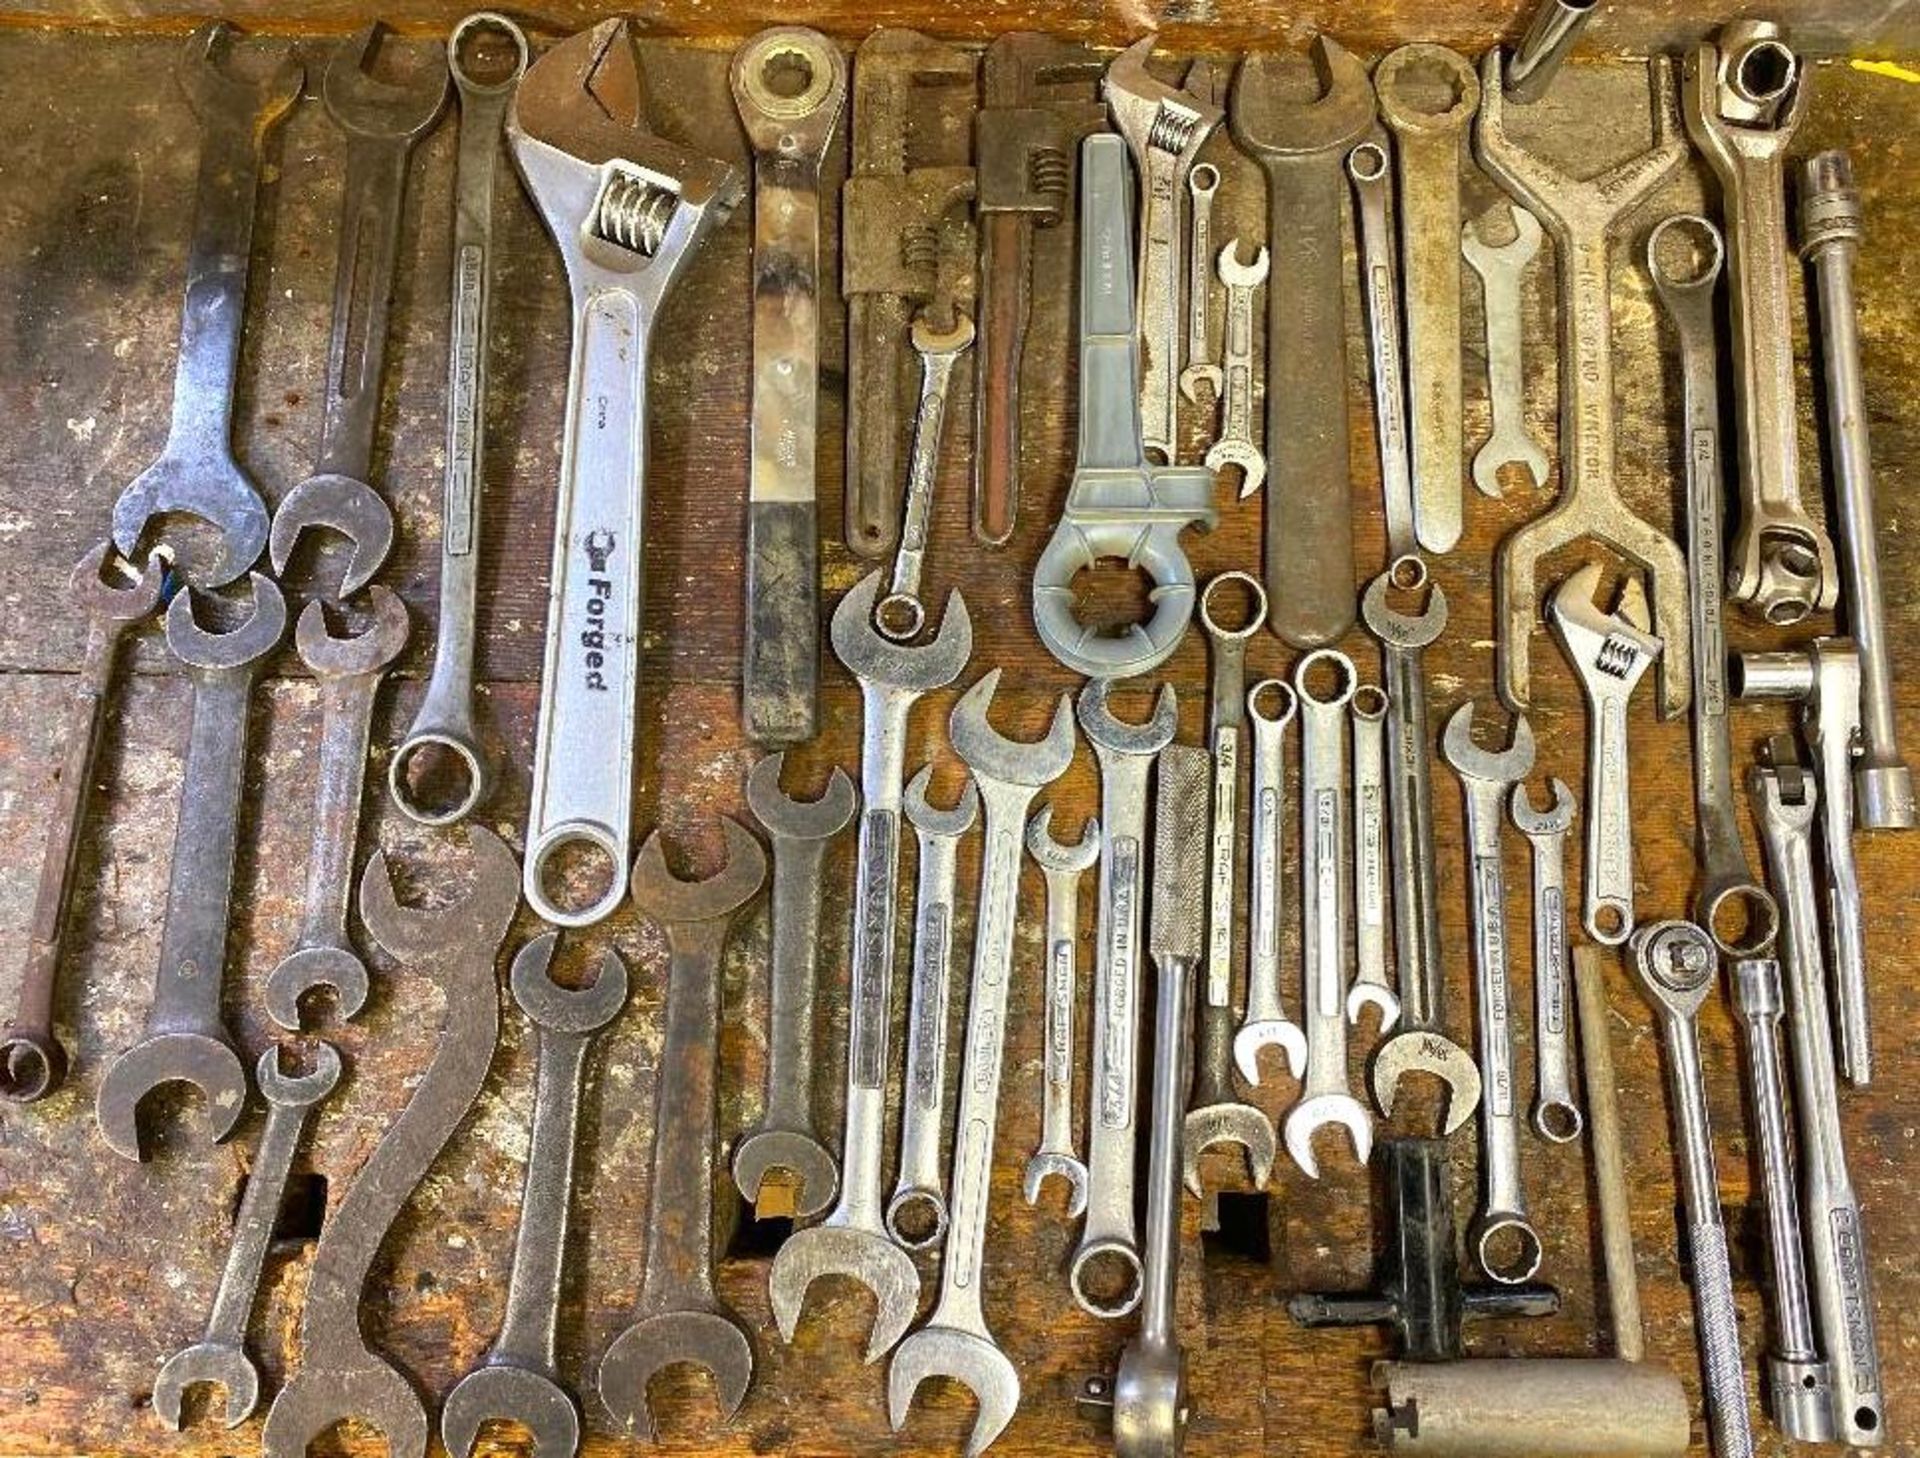 DESCRIPTION ASSORTED WRENCHES AS SHOWN LOCATION BASEMENT THIS LOT IS ONE MONEY QUANTITY 1